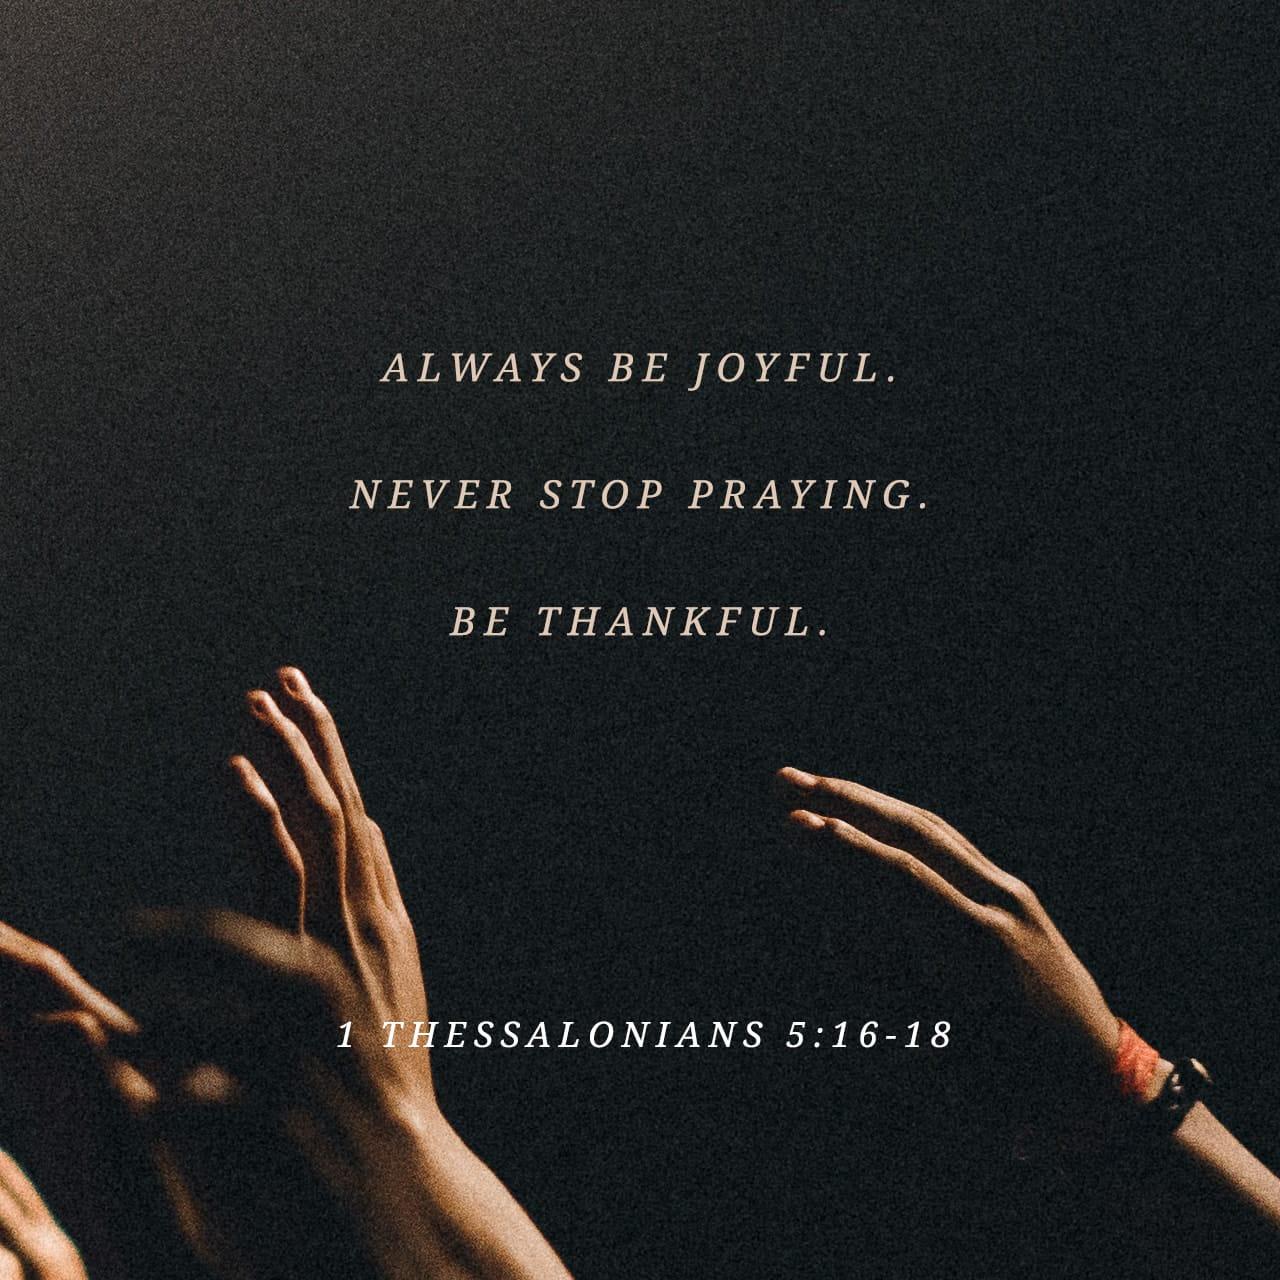 Bible verse of the day - Day 90 - image 2192 (1 Thessalonians 5:18)